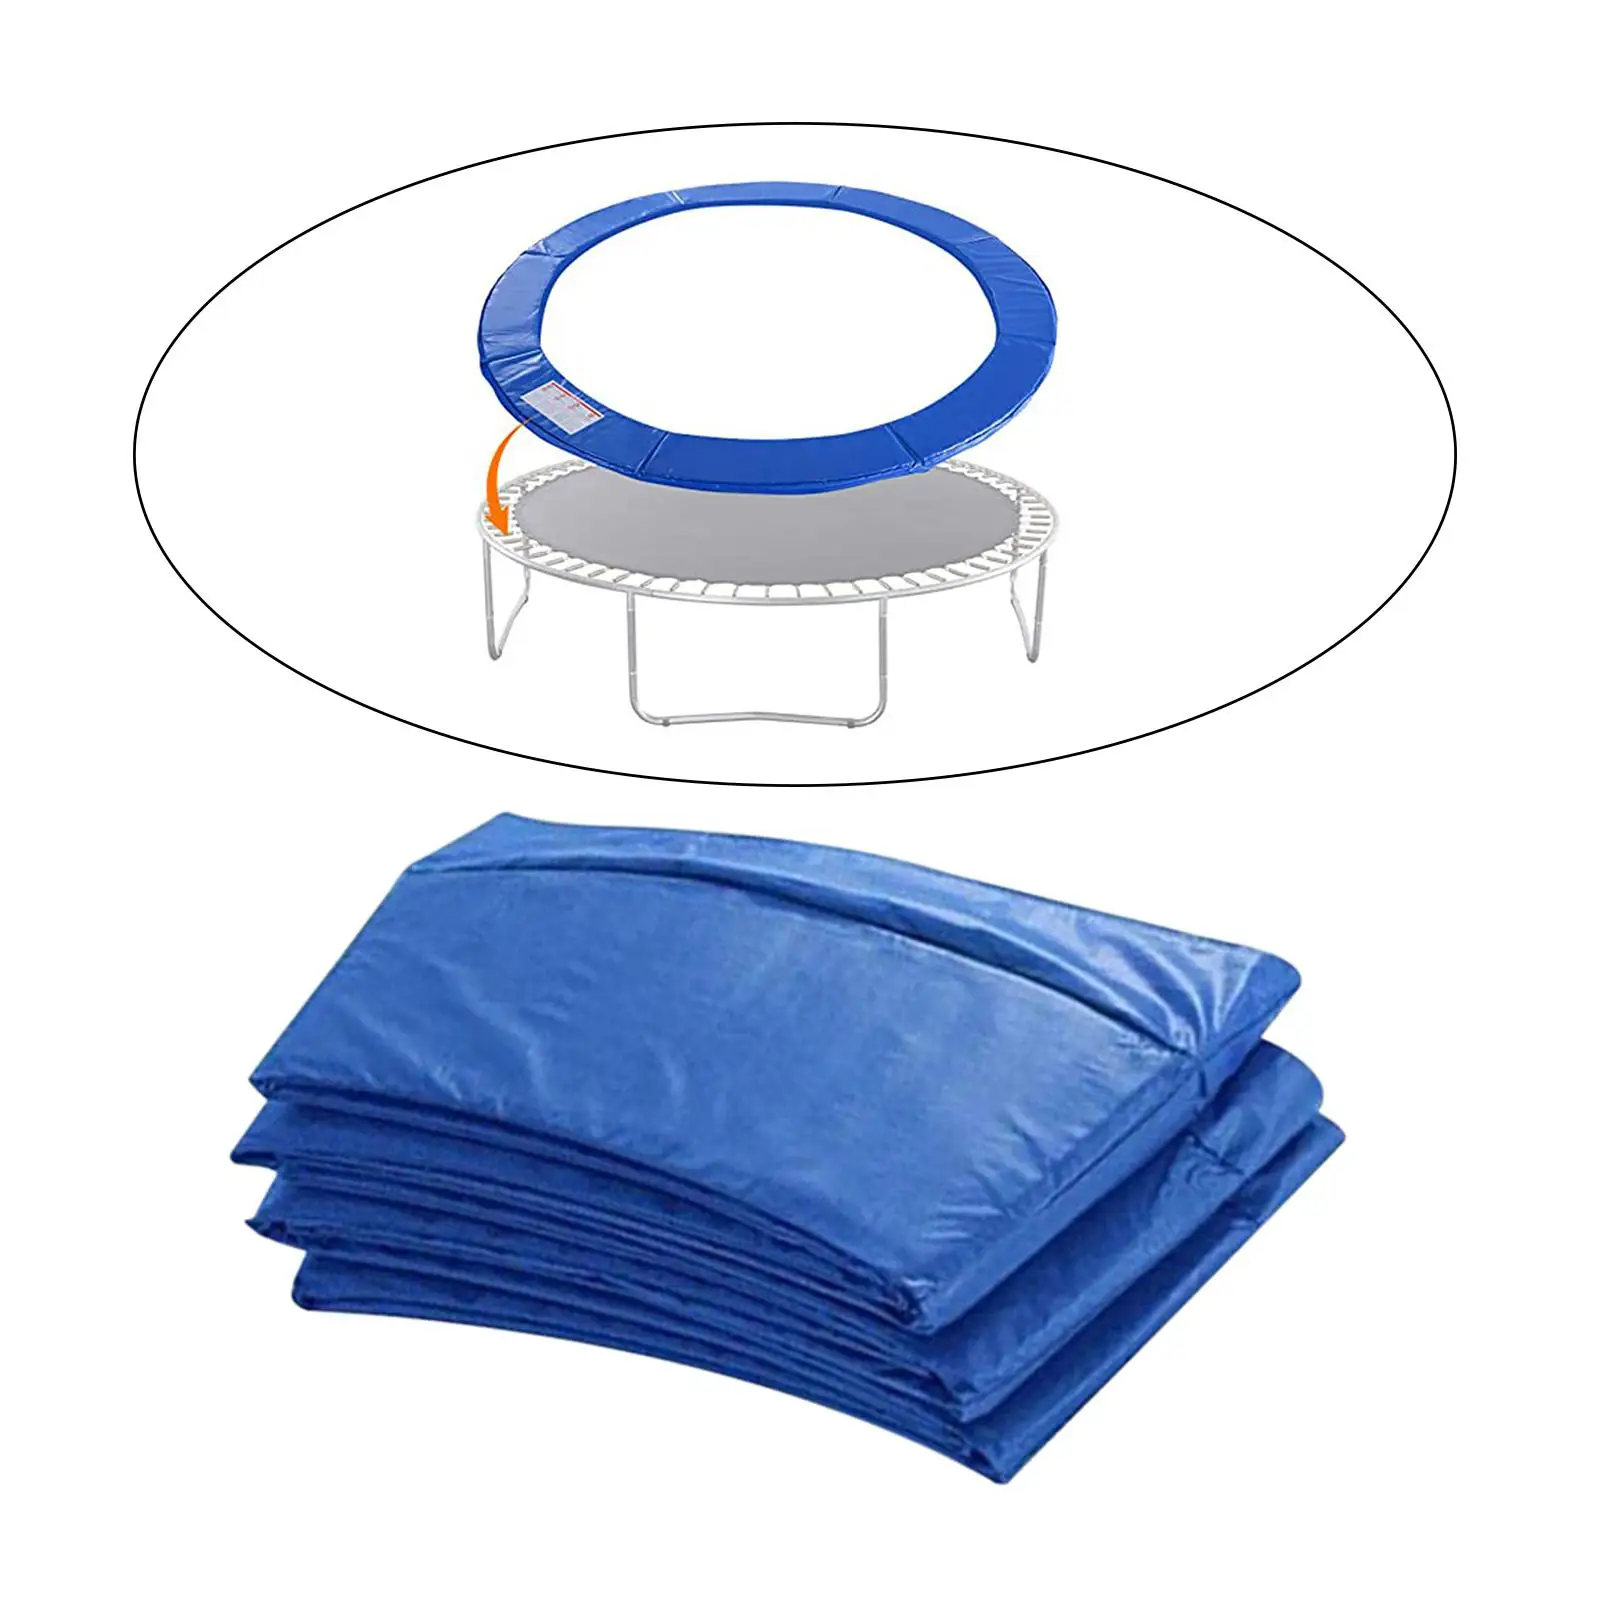 Trampoline Pad Jumping Bed Protective Cover Epe Pad Fits Round Trampoline 12ft Protection Replacement Side Guard Spring Cover